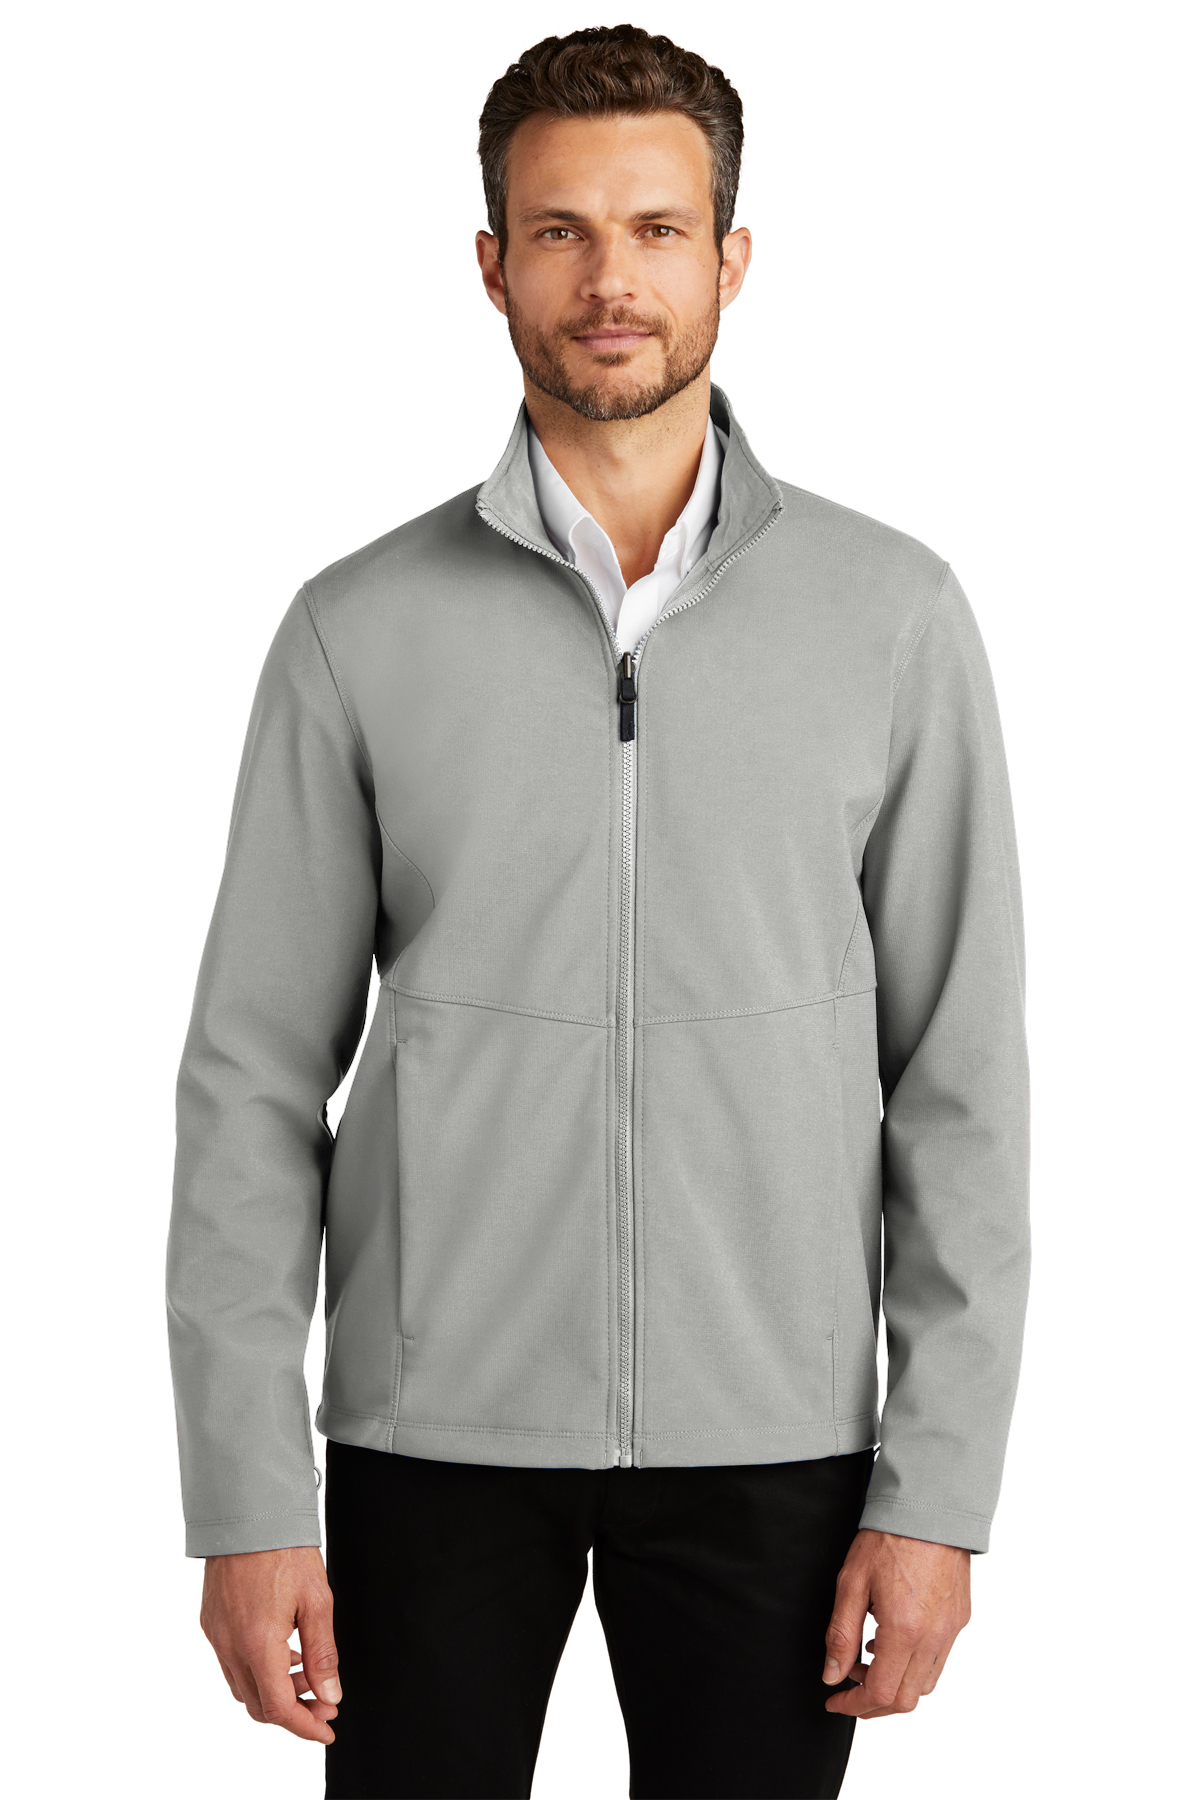 Port Authority Collective Soft Shell Jacket | Product | Company